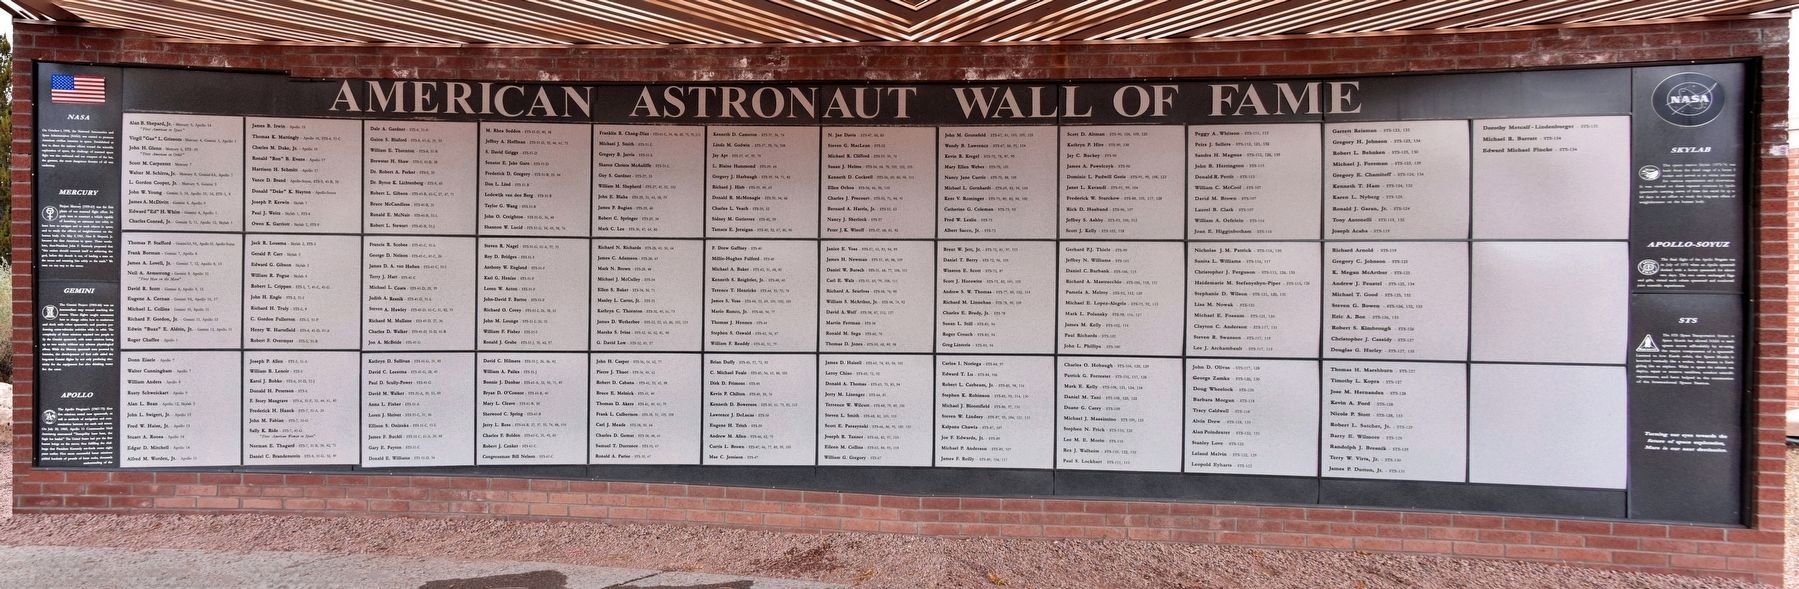 American Astronaut Wall of Fame Marker, Meteor Crater, AZ image. Click for full size.